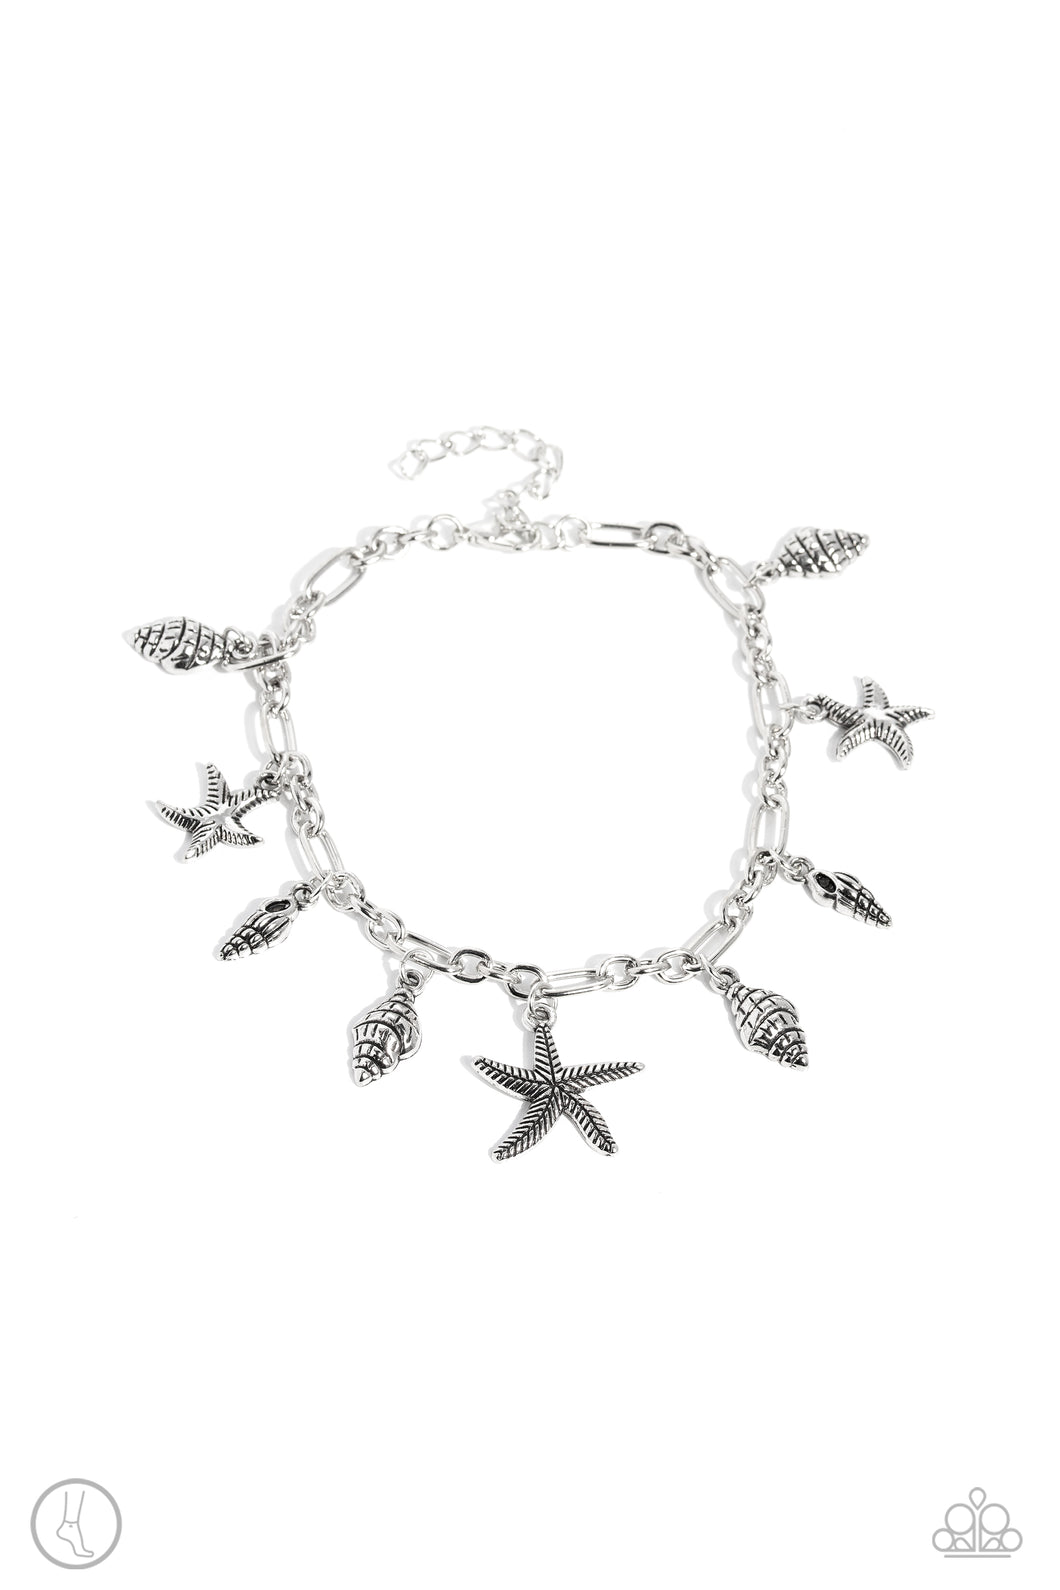 Stars and Shells - Silver